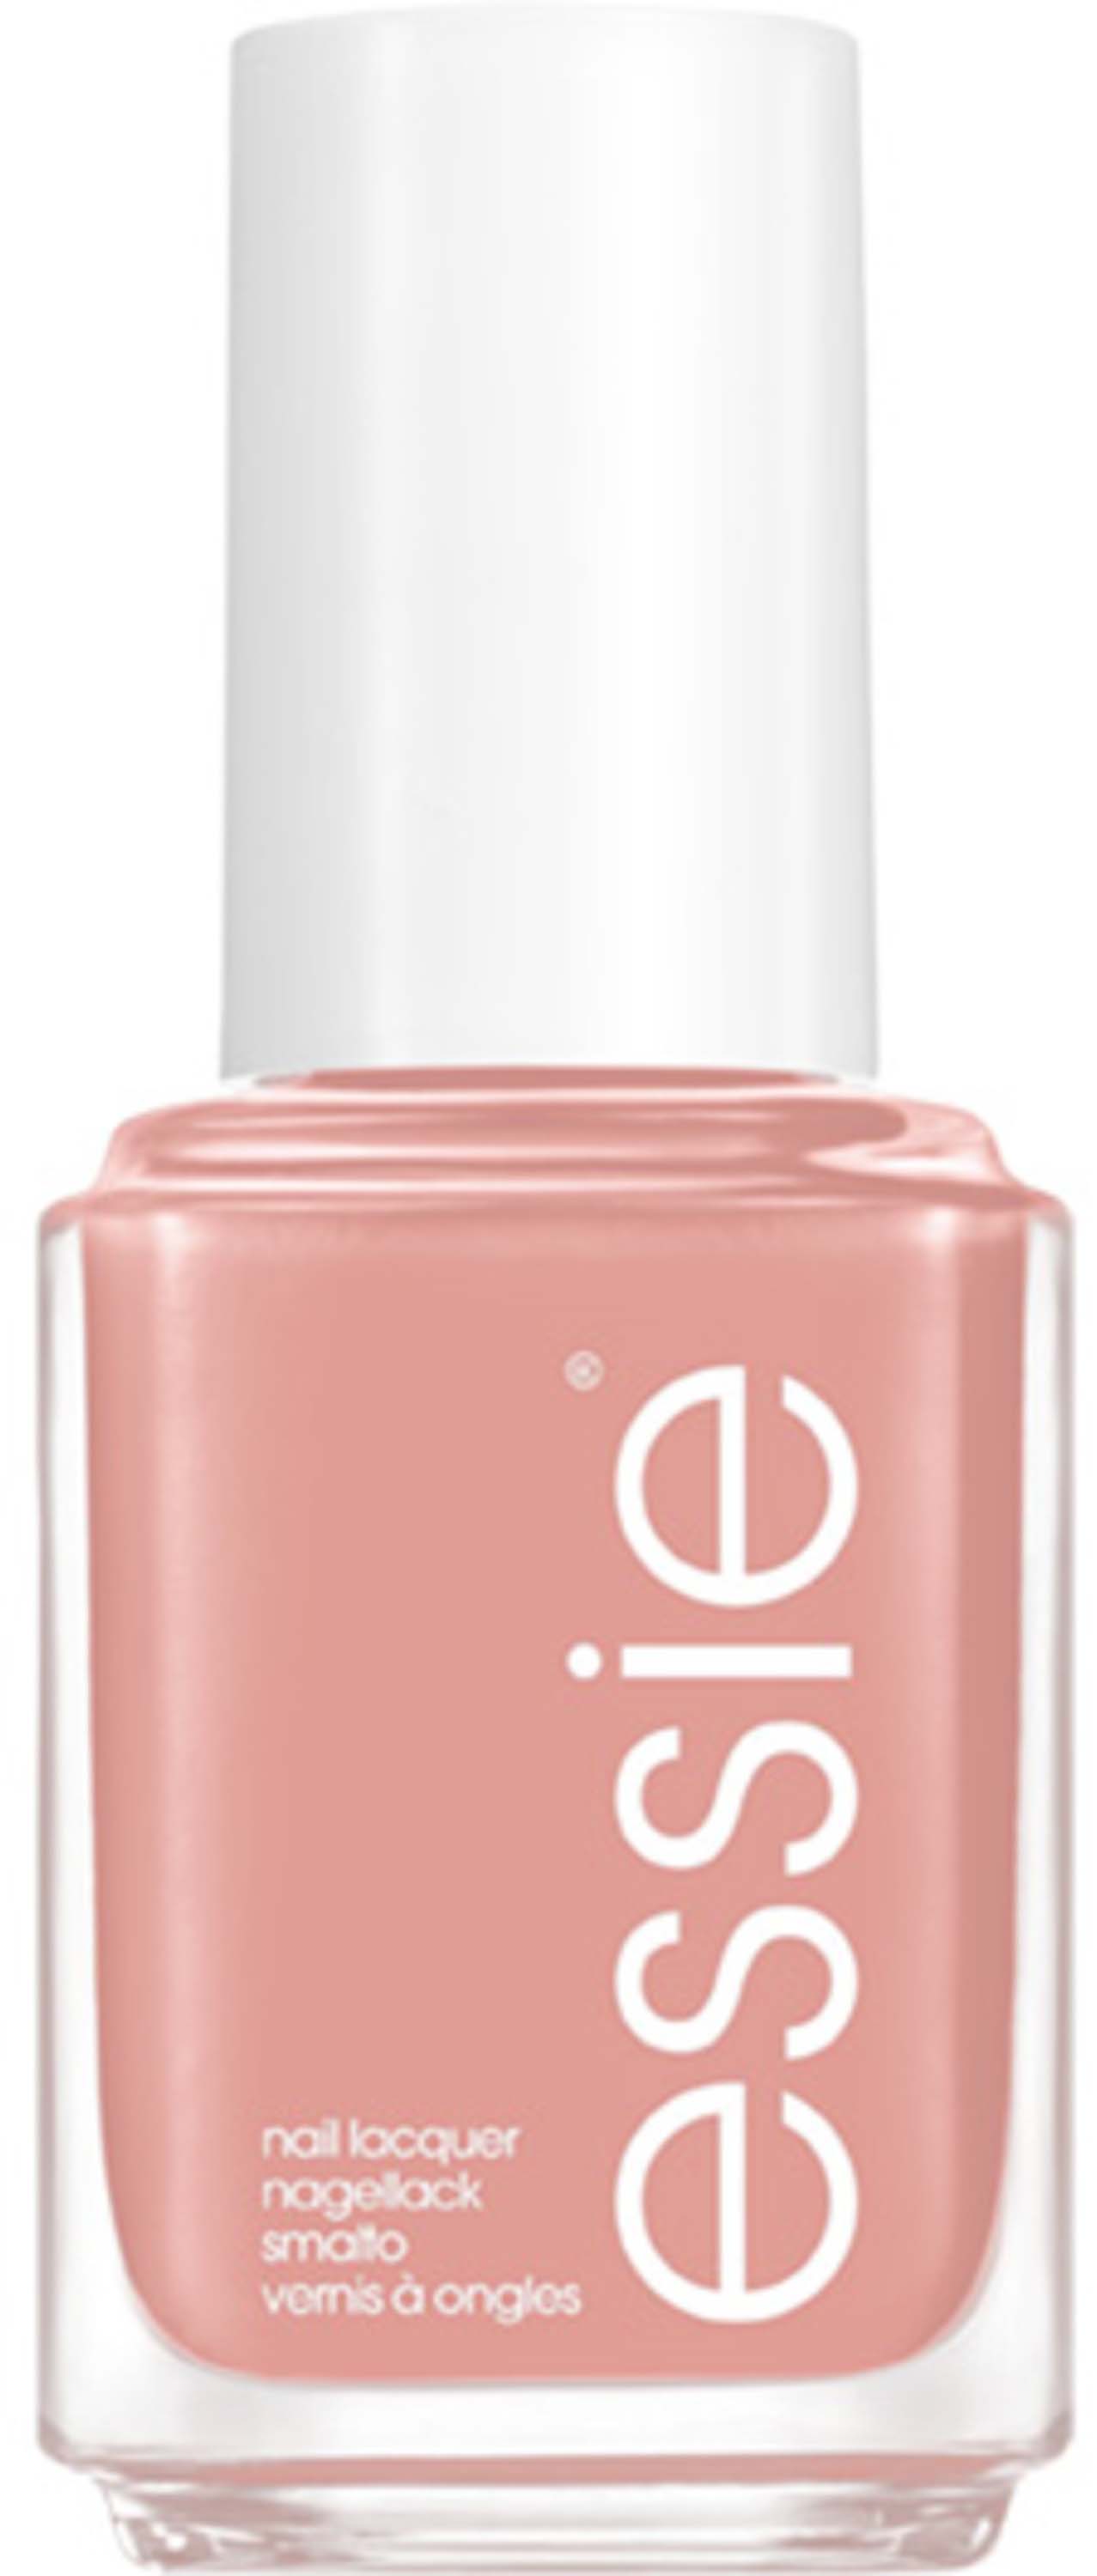 not Is Lacquer Nail for 749 Real Essie bed collection The Snuggle red-y